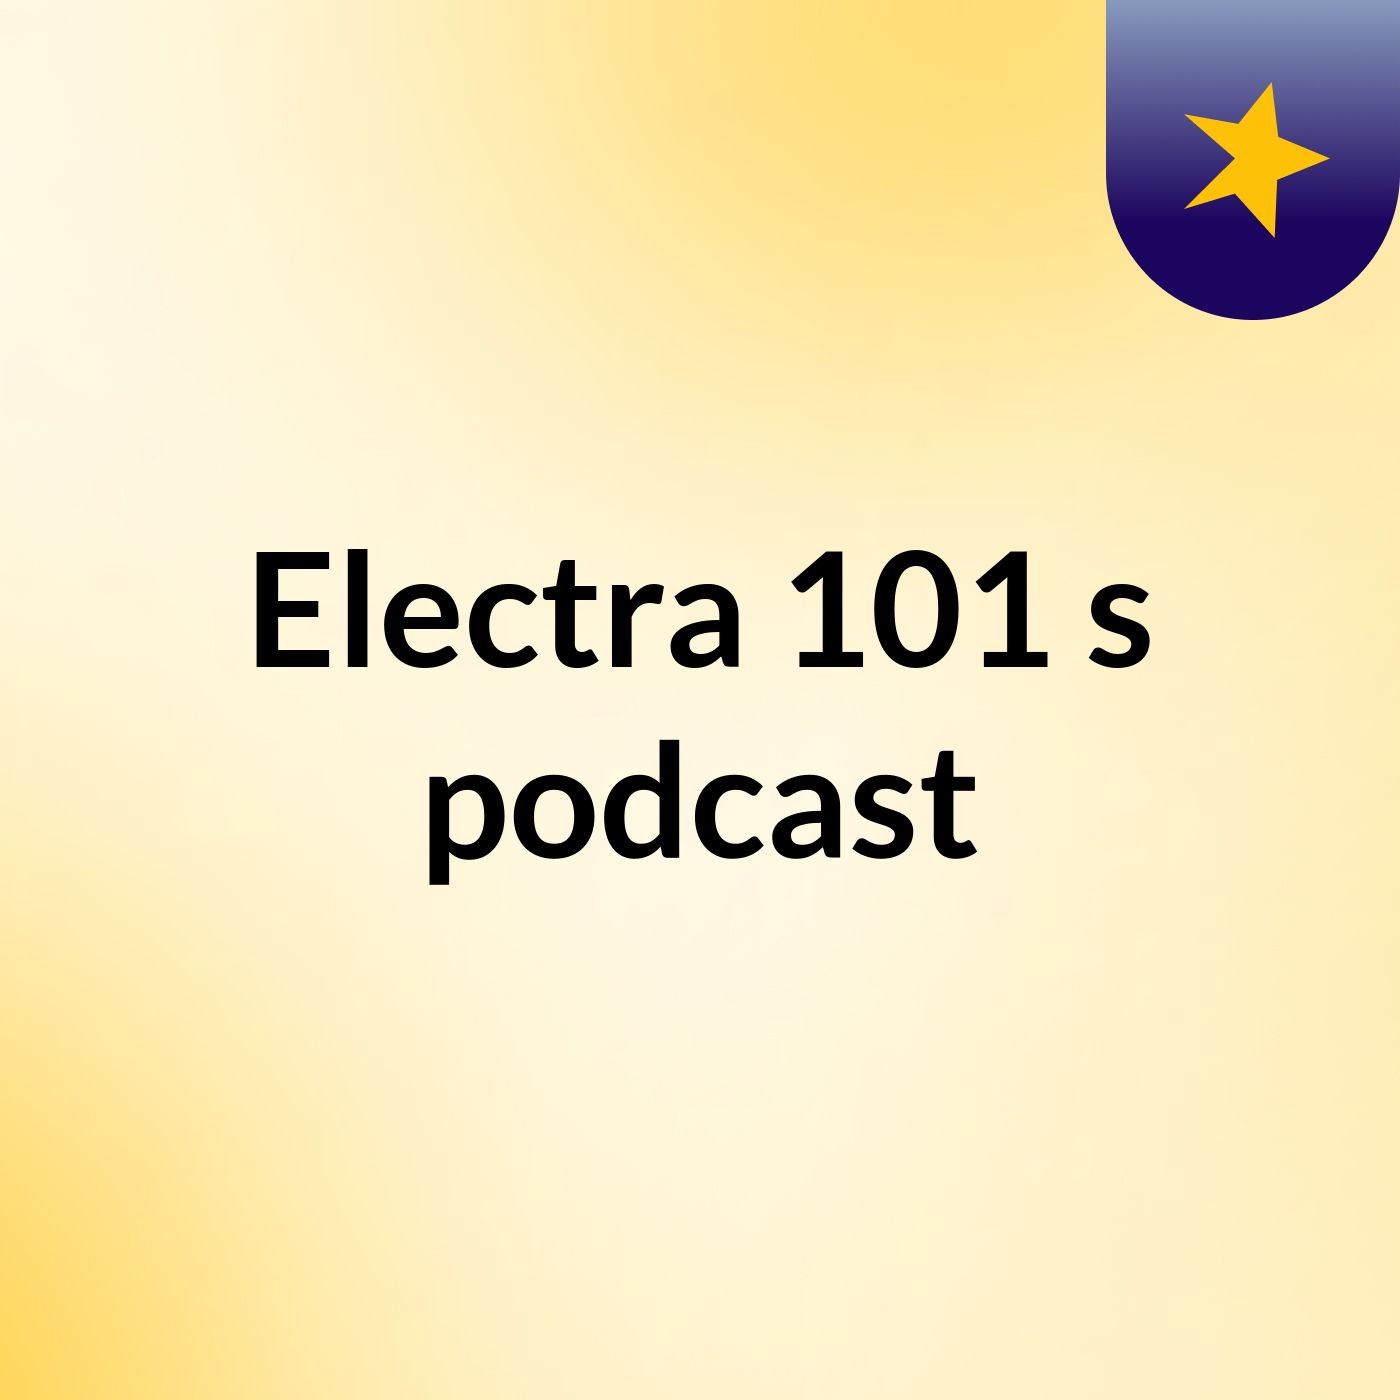 Episode 3 - Electra 101's podcast